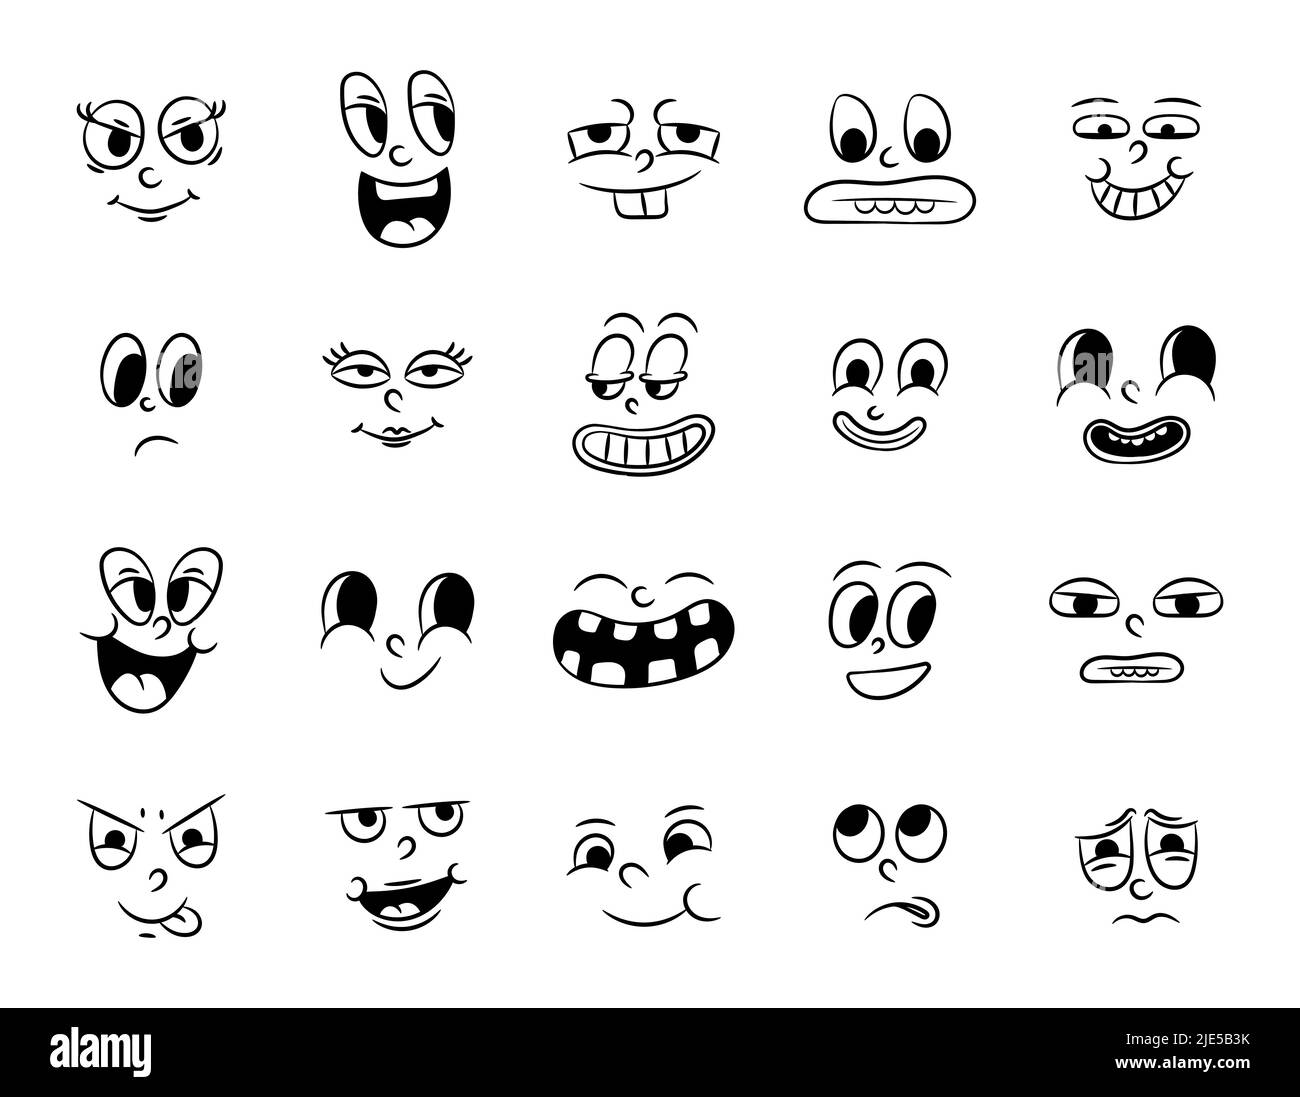 Collection of old retro traditional cartoon animation. Vintage faces of people with different emotions of the 20s 30s. Emoji character expressions 50s Stock Vector